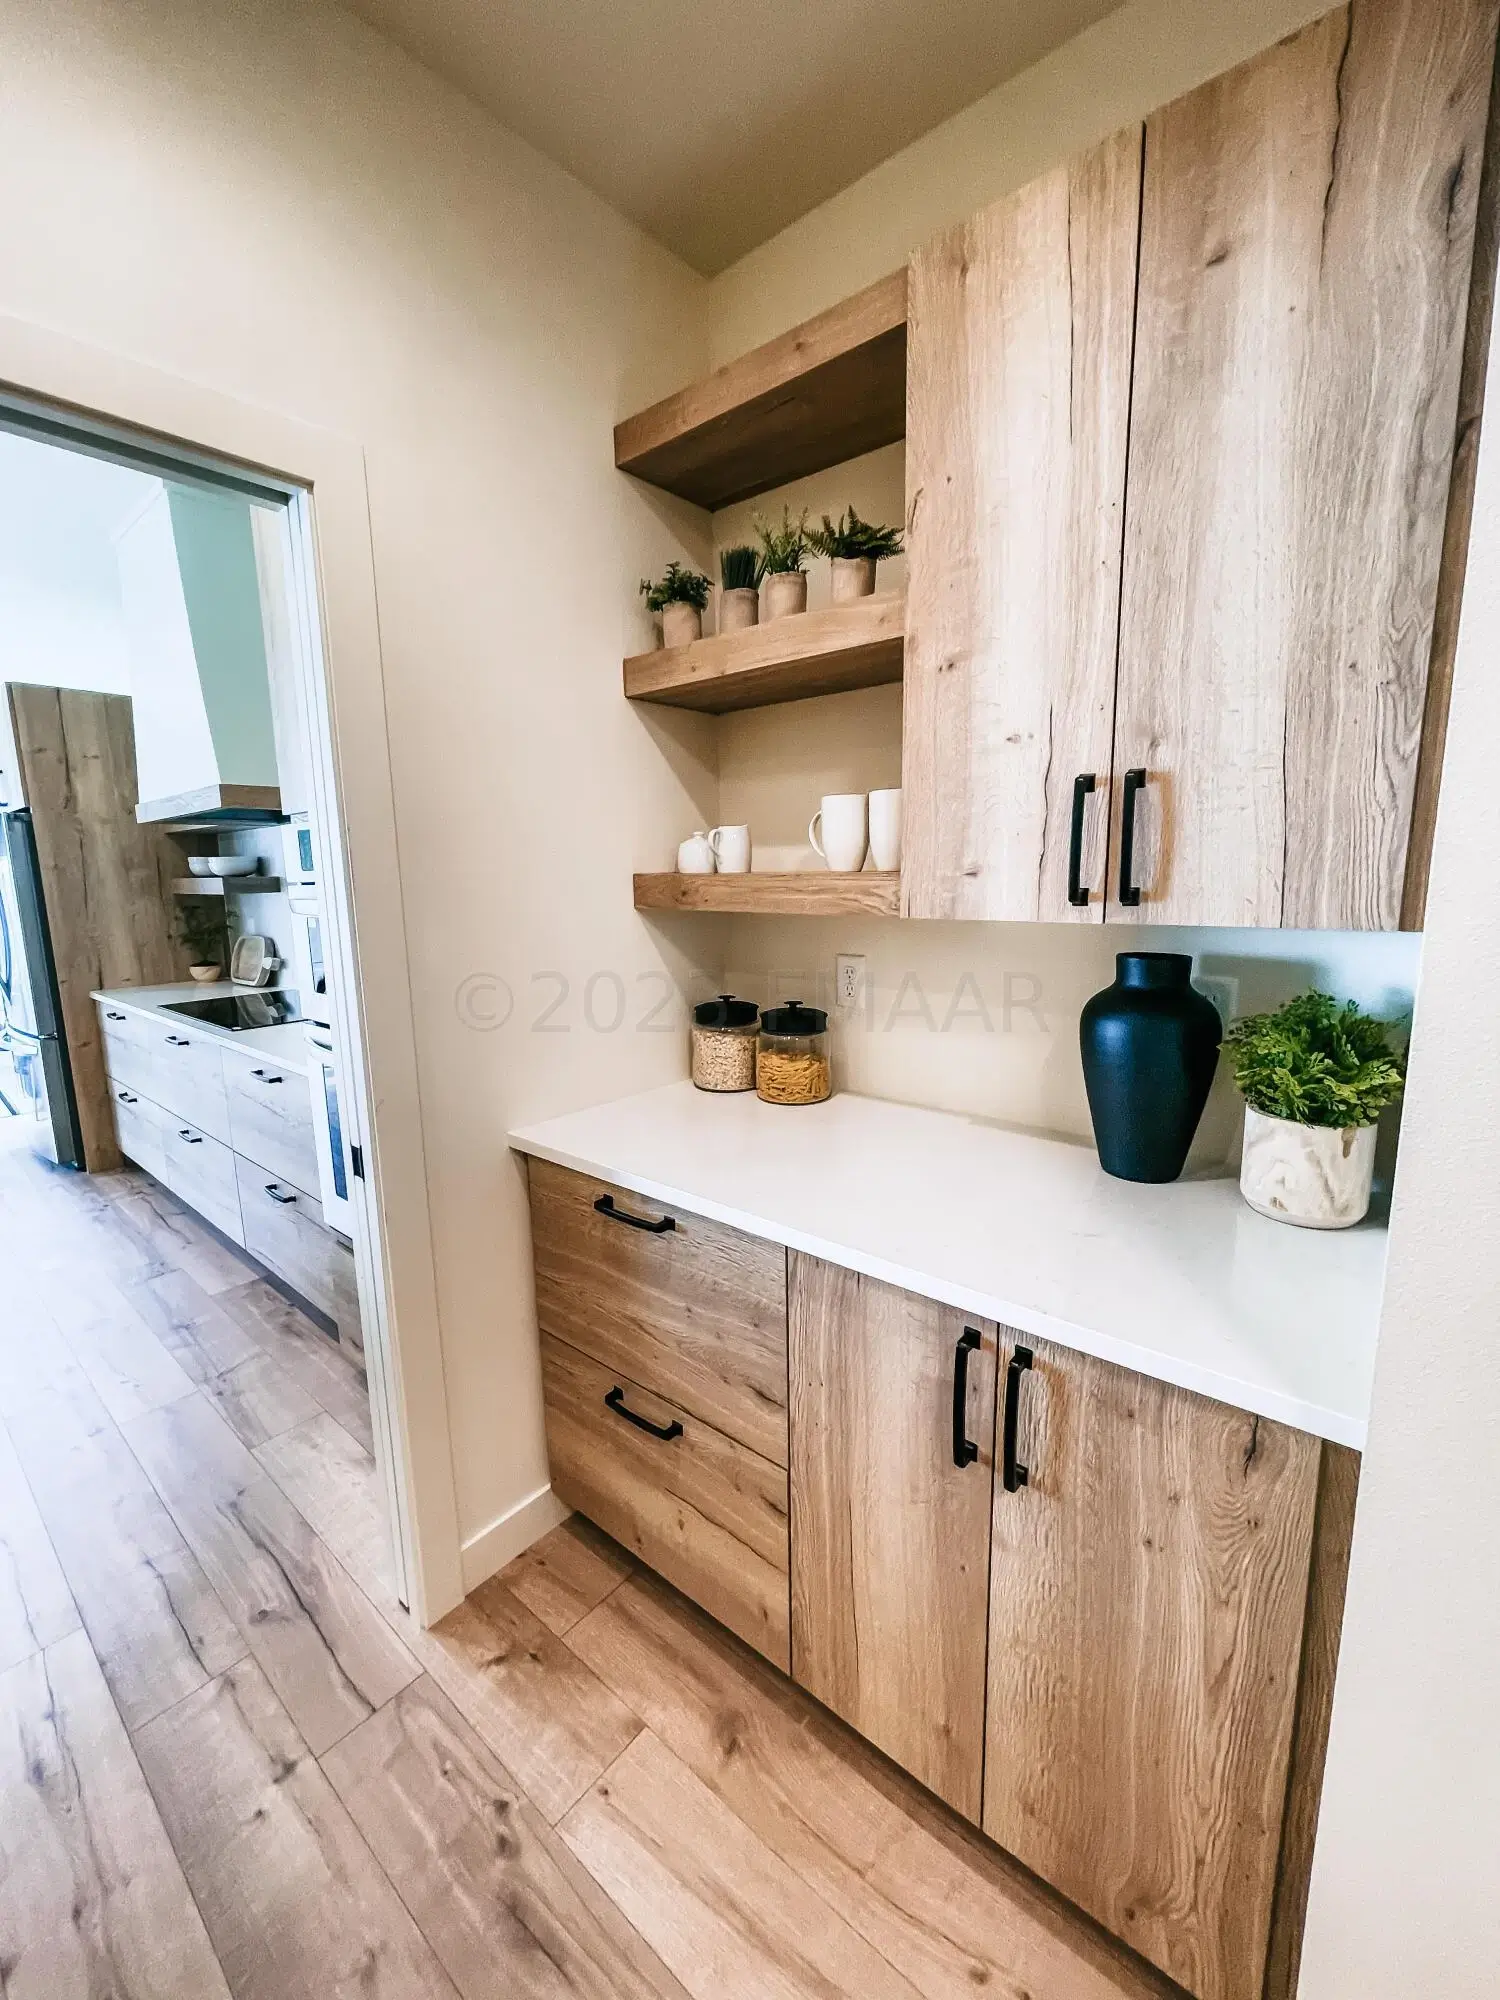 A Kitchen With Wood Cabinets And Shelves.